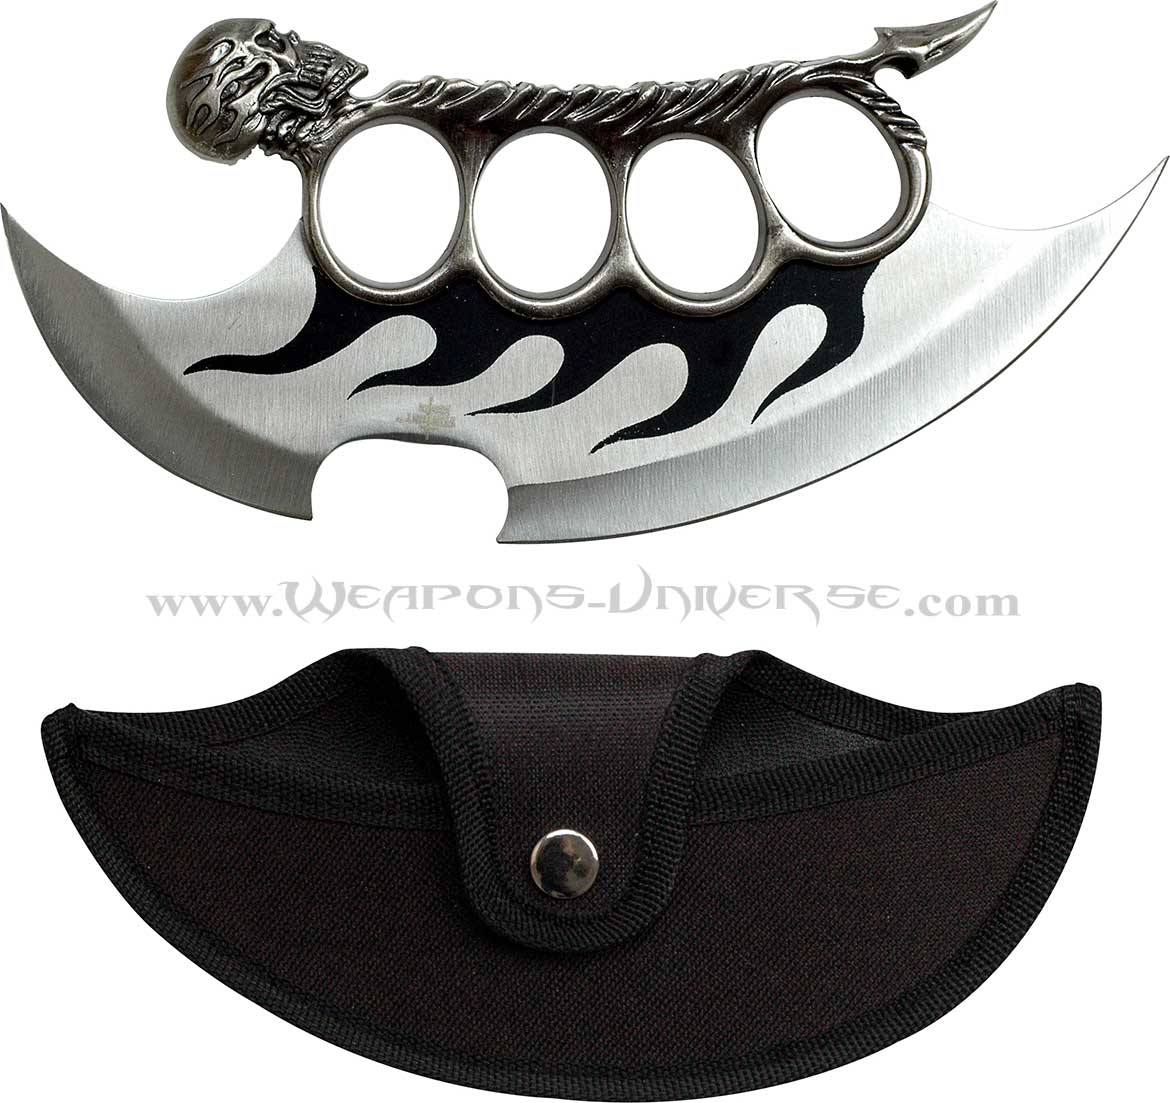 Fantasy Knife with Display, FM-575